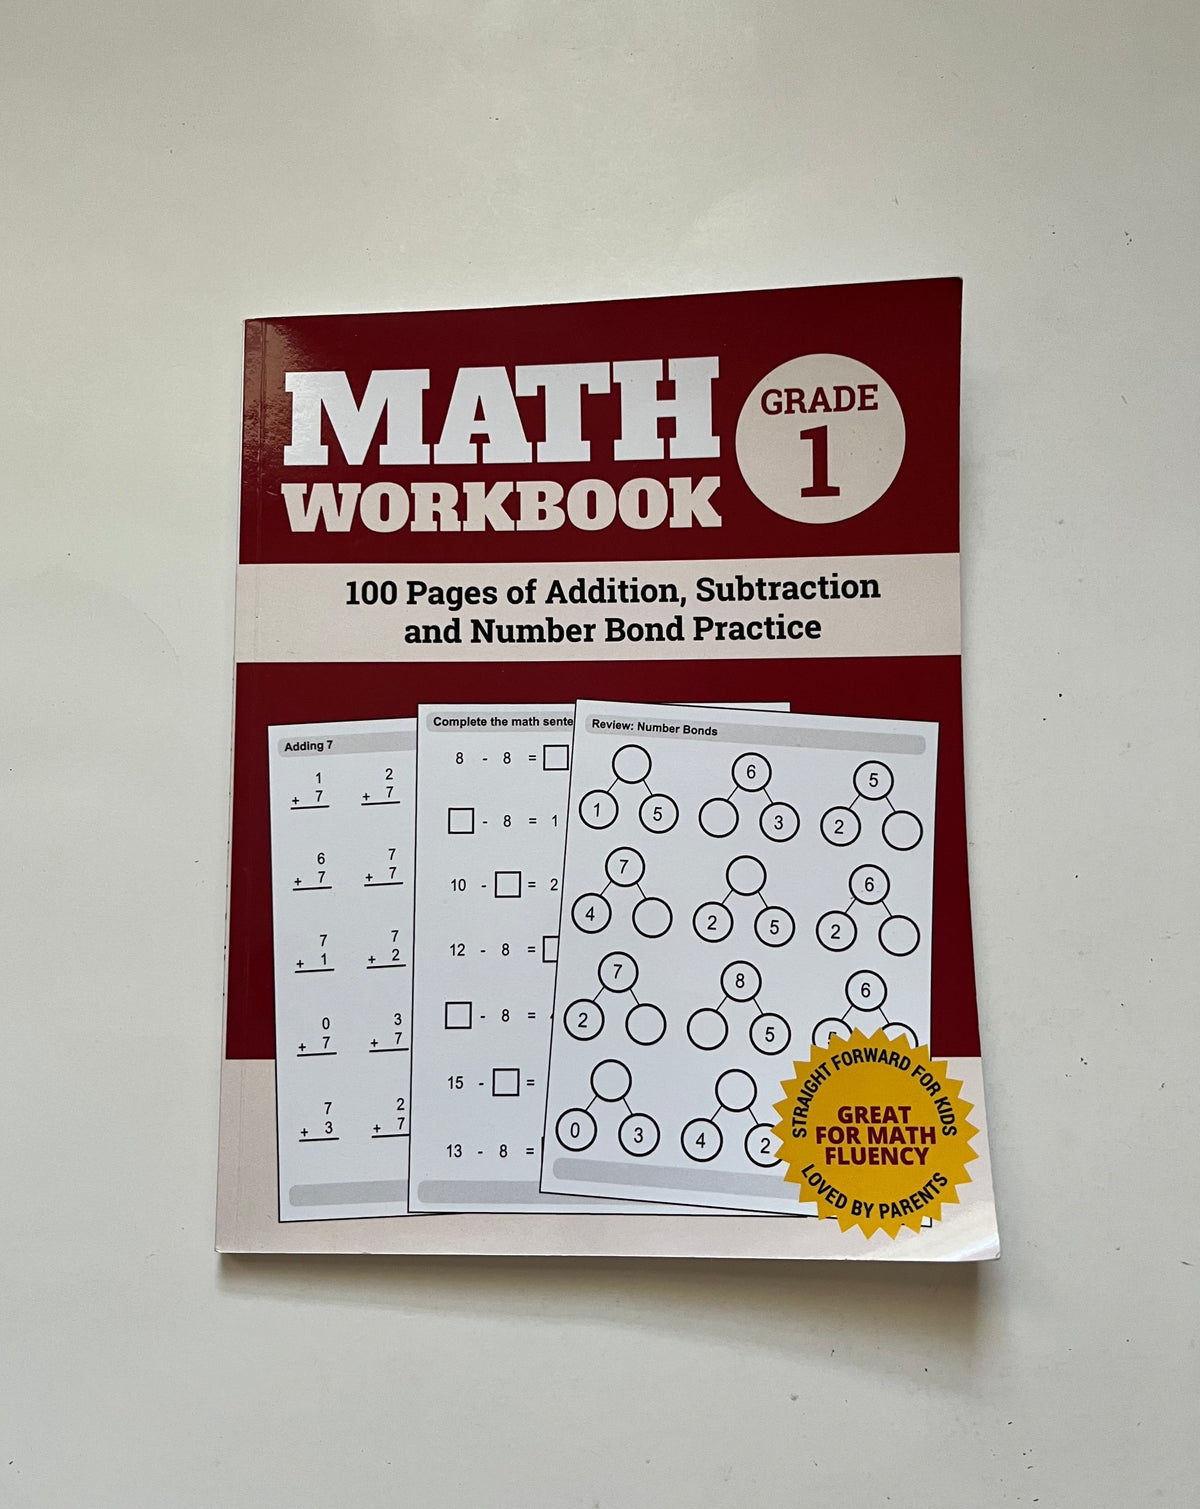 Grade 1 Math Workbook: 100 Pages of Addition, Subtraction and Number Bond Practice